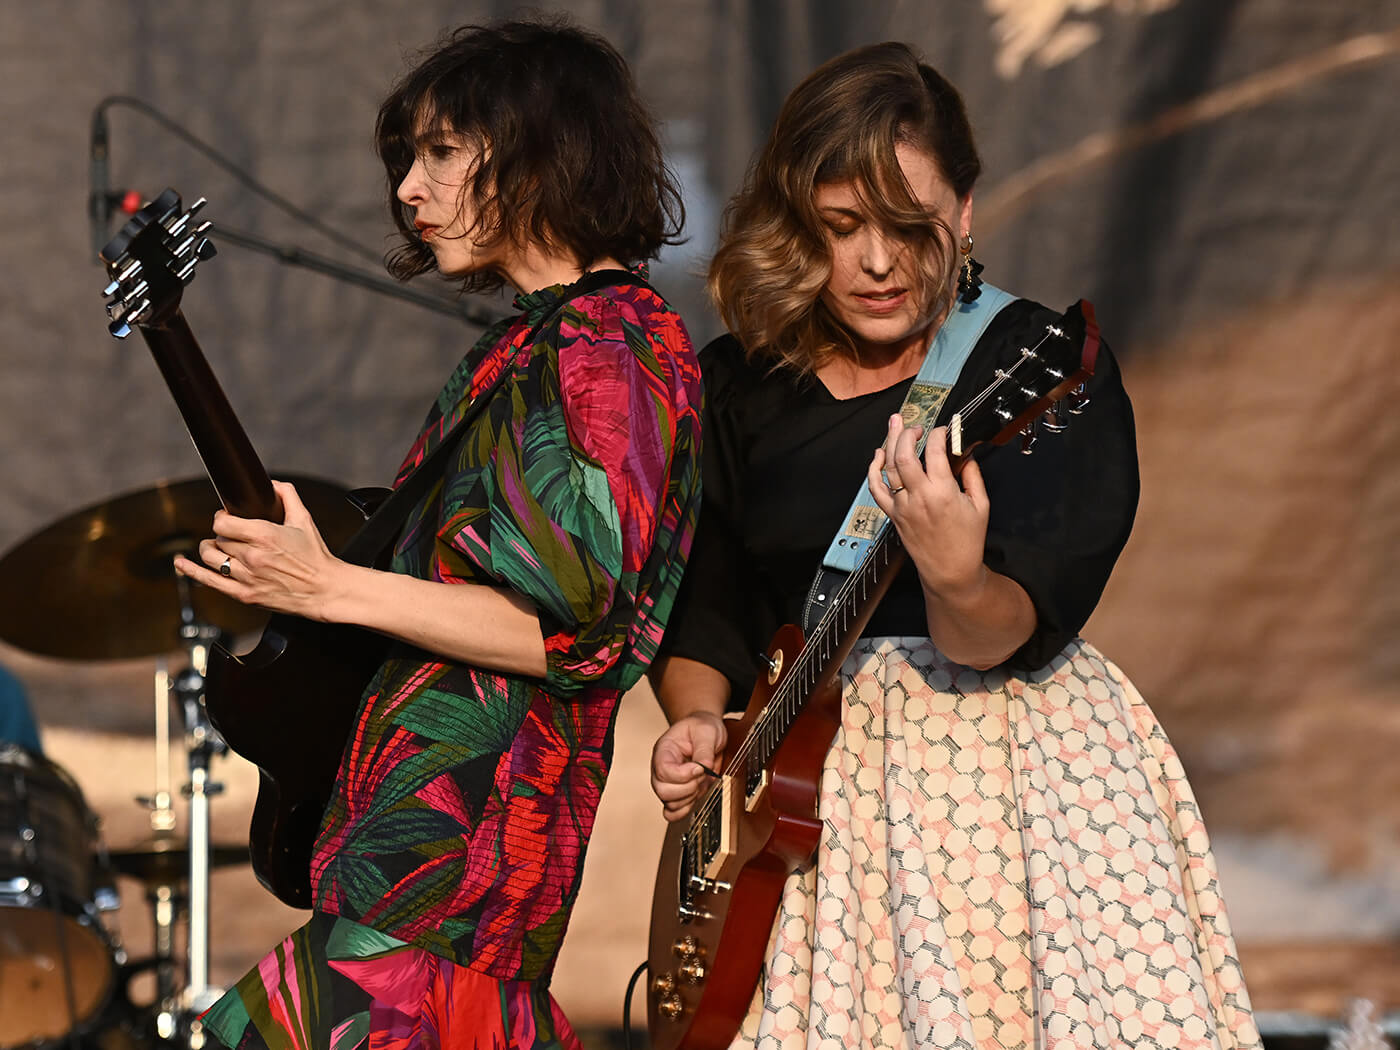 Carrie Brownstein and Corin Tucker of Sleater-Kinney performing at Riot Fest 2022, photo by Daniel Boczarski/Getty Images